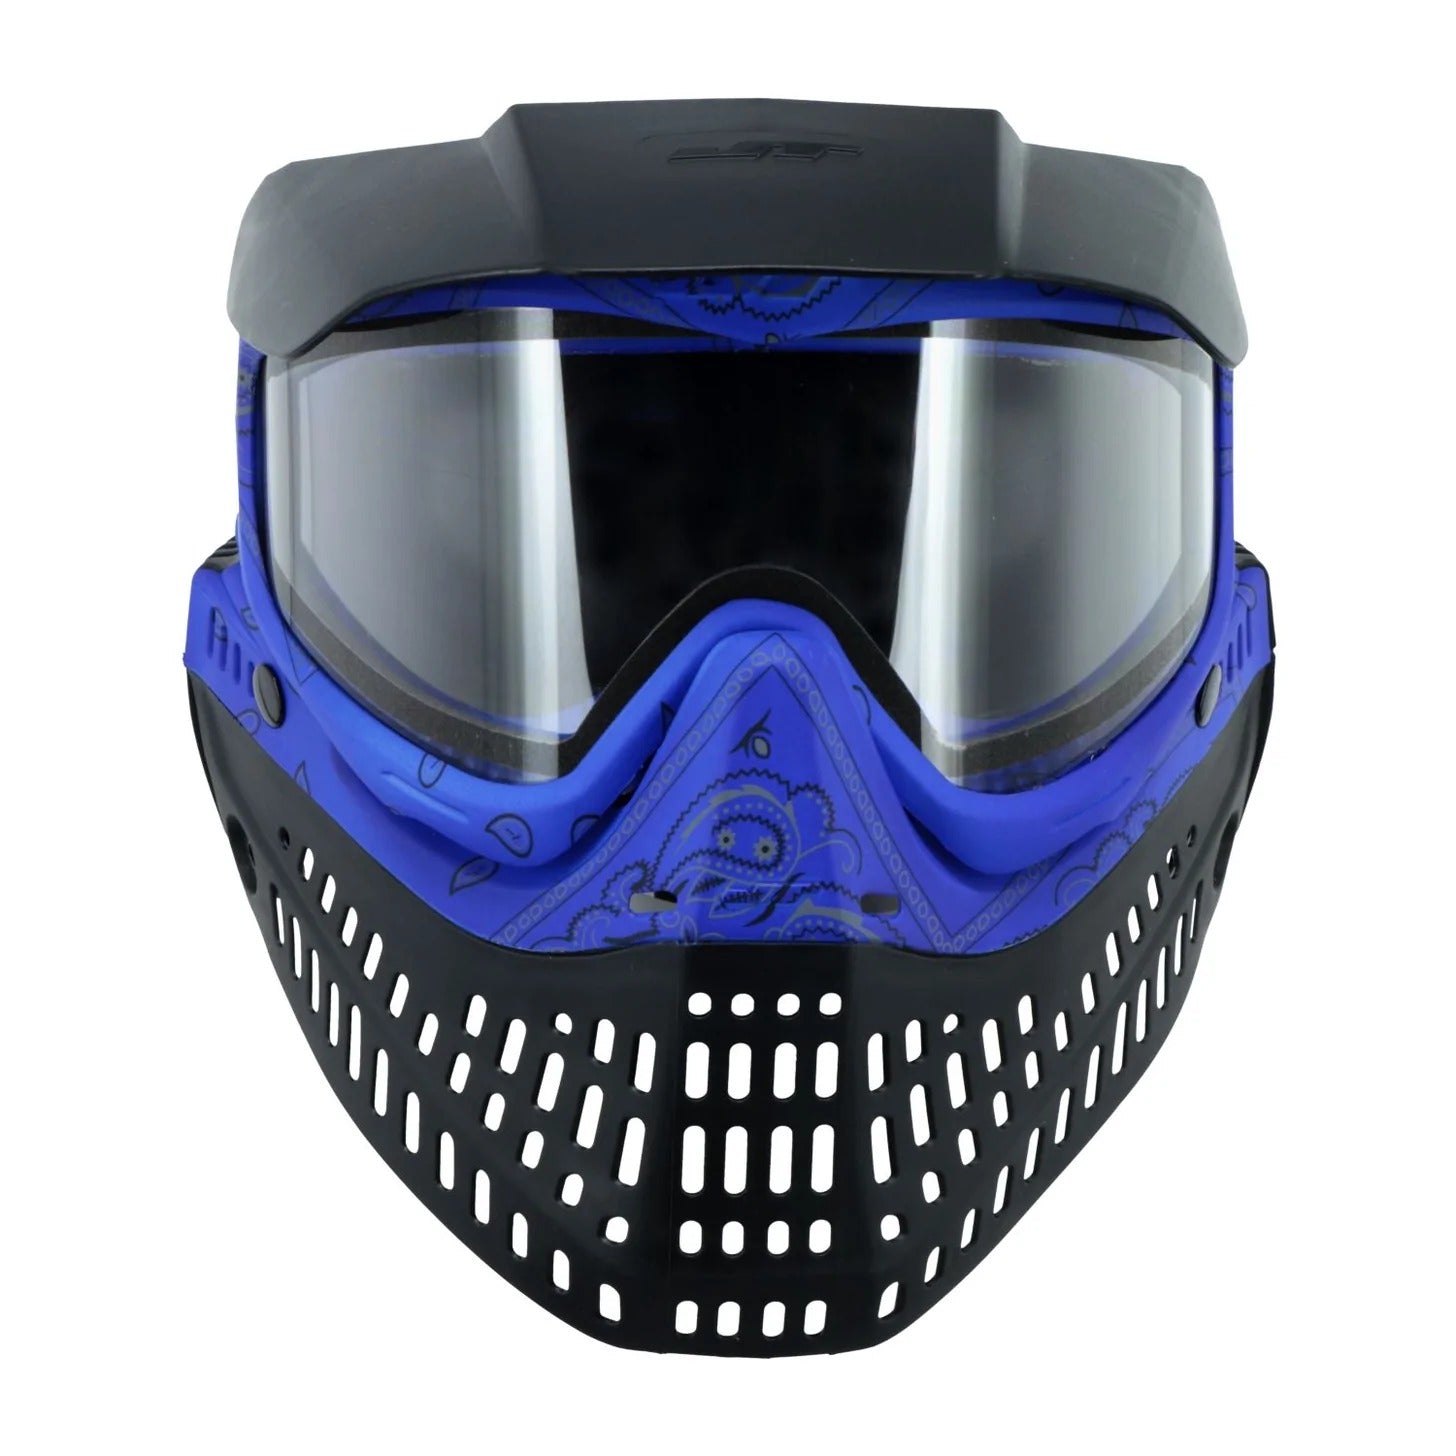 JT Bandana Series Proflex Paintball Mask - Blue w/ Clear and Smoke Thermal Lens